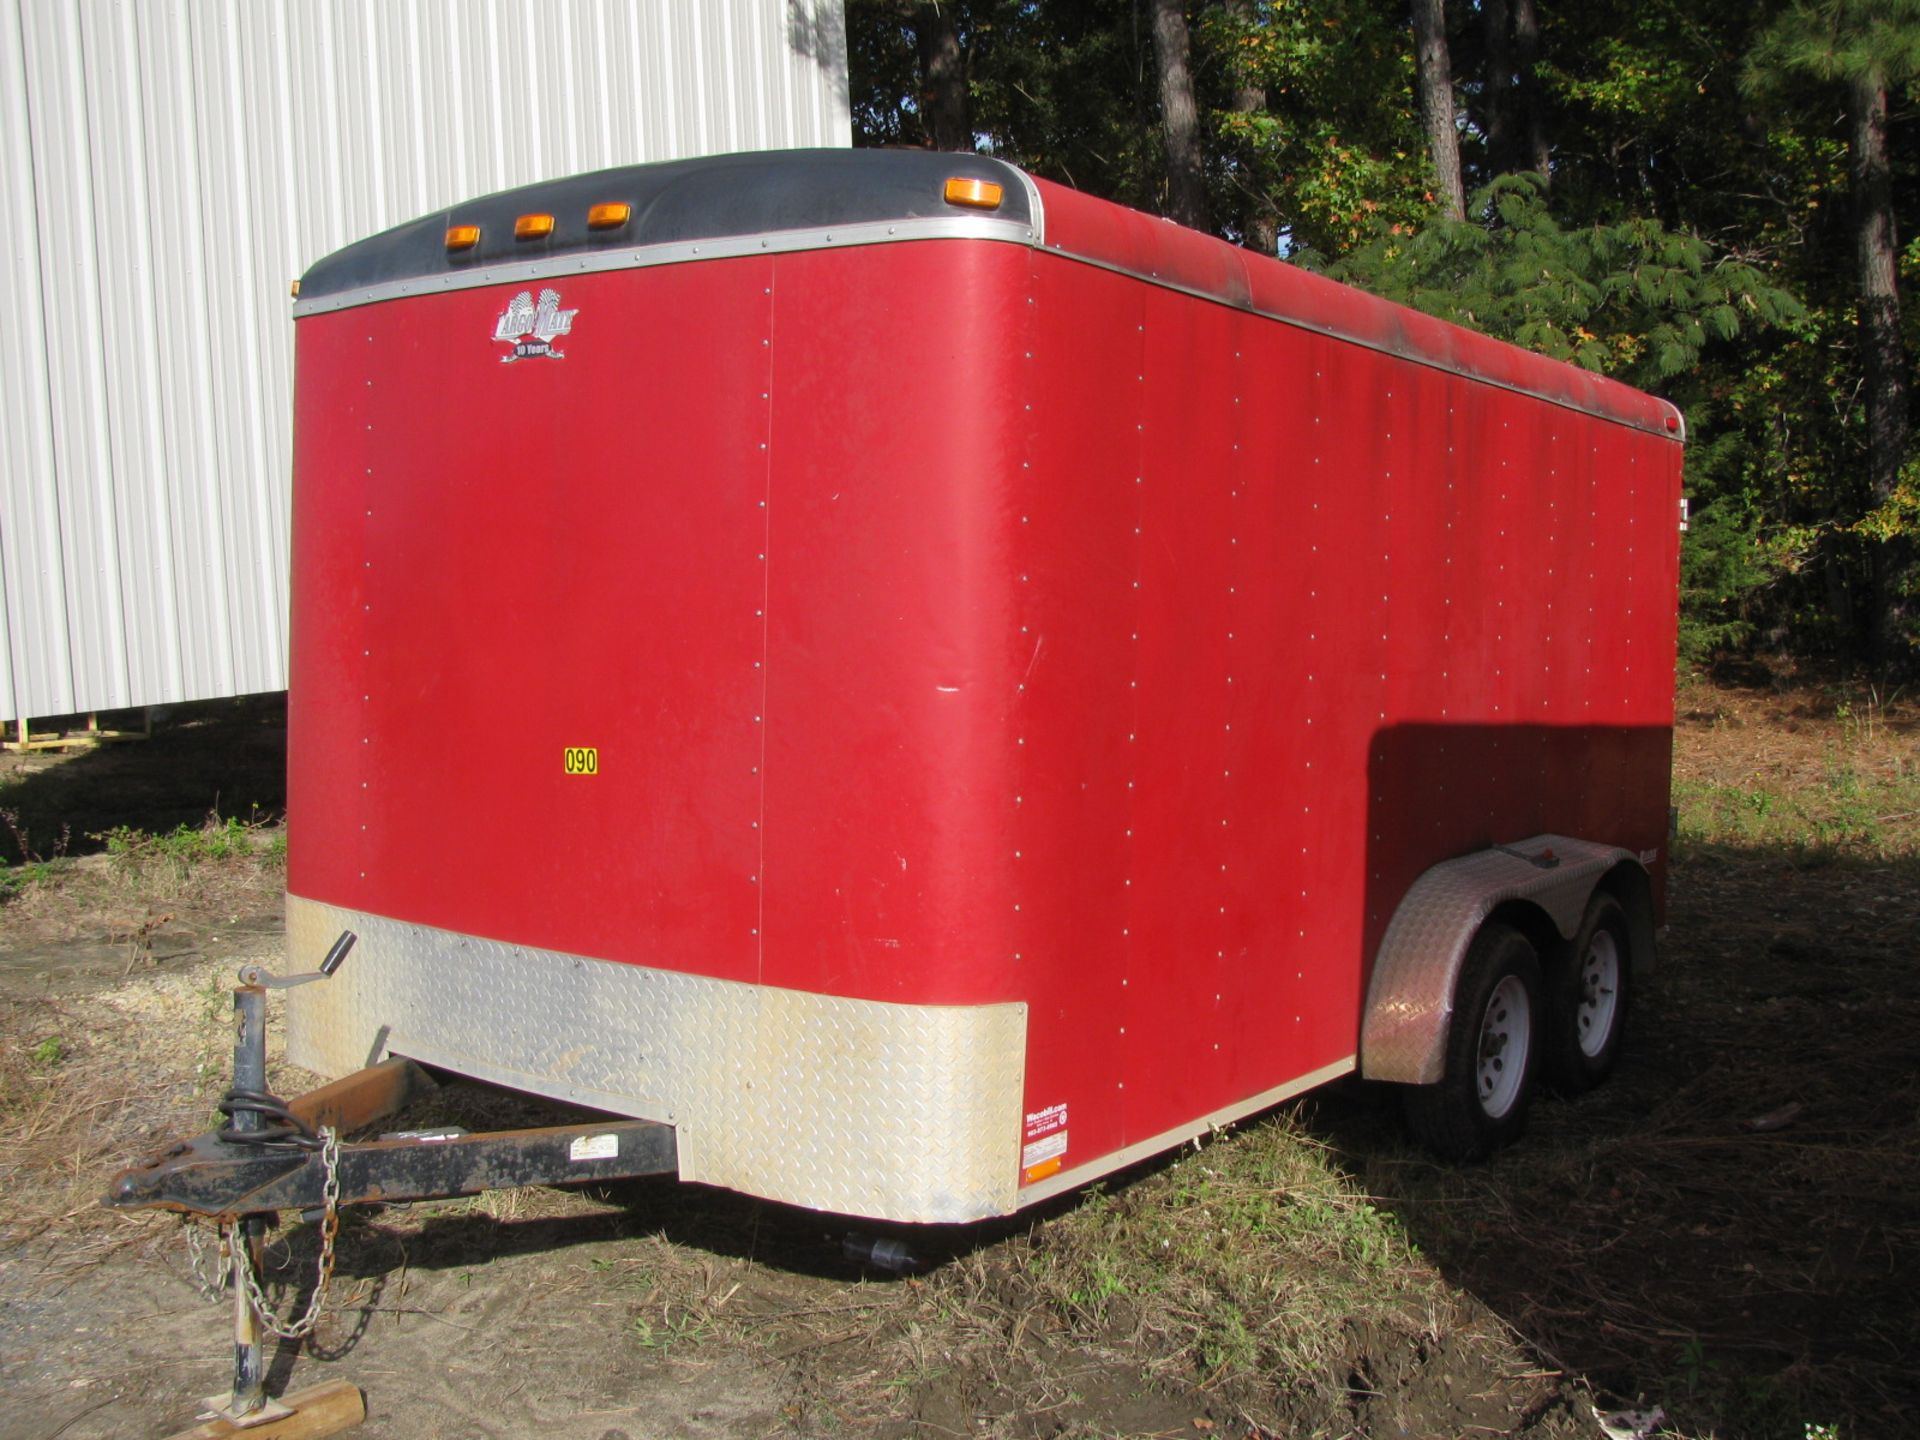 2007 Cargo Mate 16' Enclosed Trailer Vin# 5NHUBLY248Y057434, Mfg Forest River Inc - Image 2 of 5